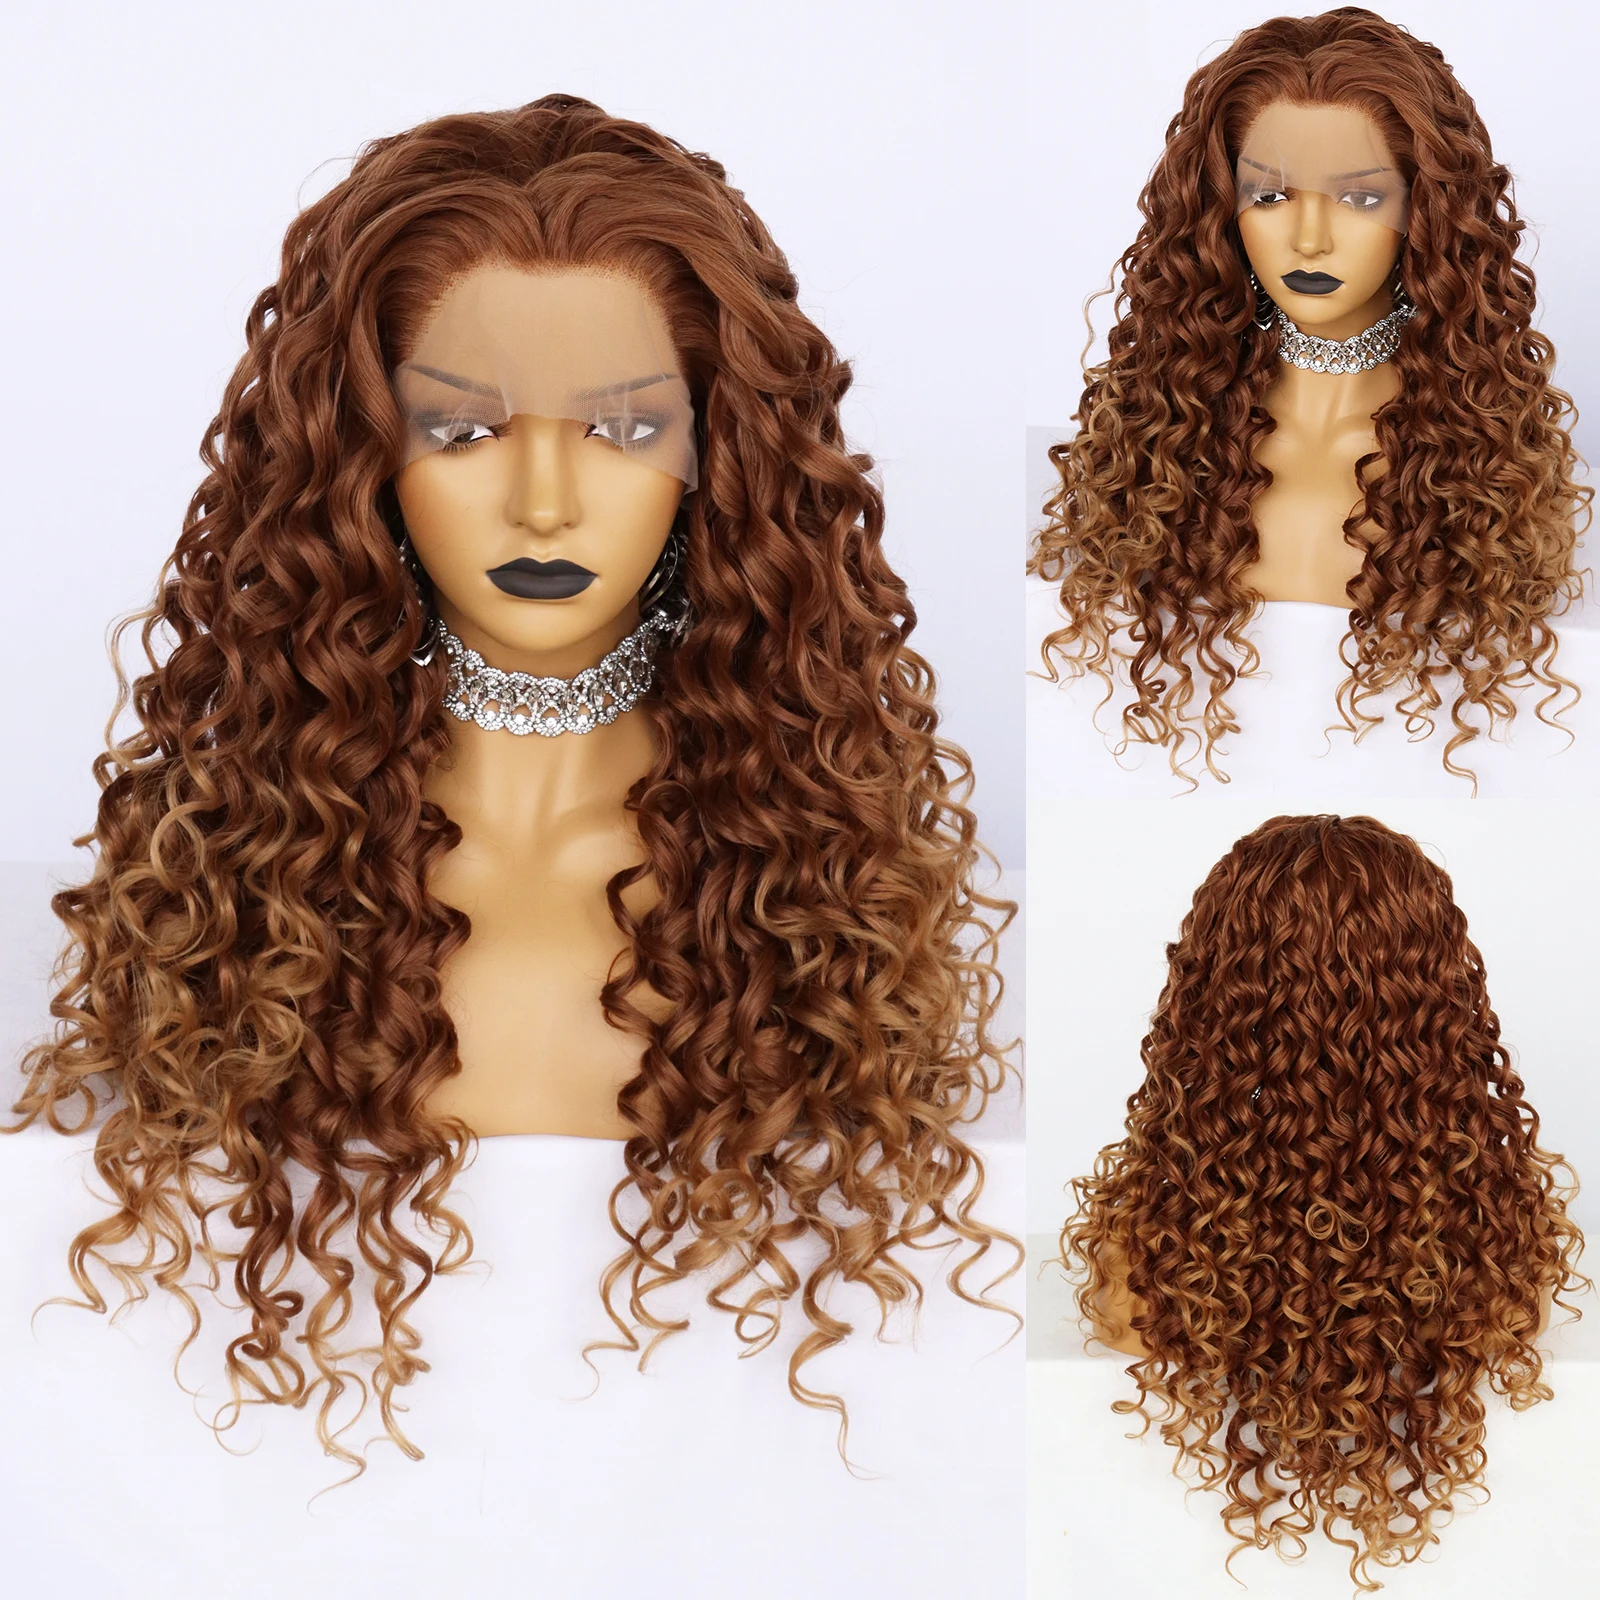 JONETING Long Curly Brown Color Lace Front Fiber Heat Resistant Synthetic Wigs for Women Party